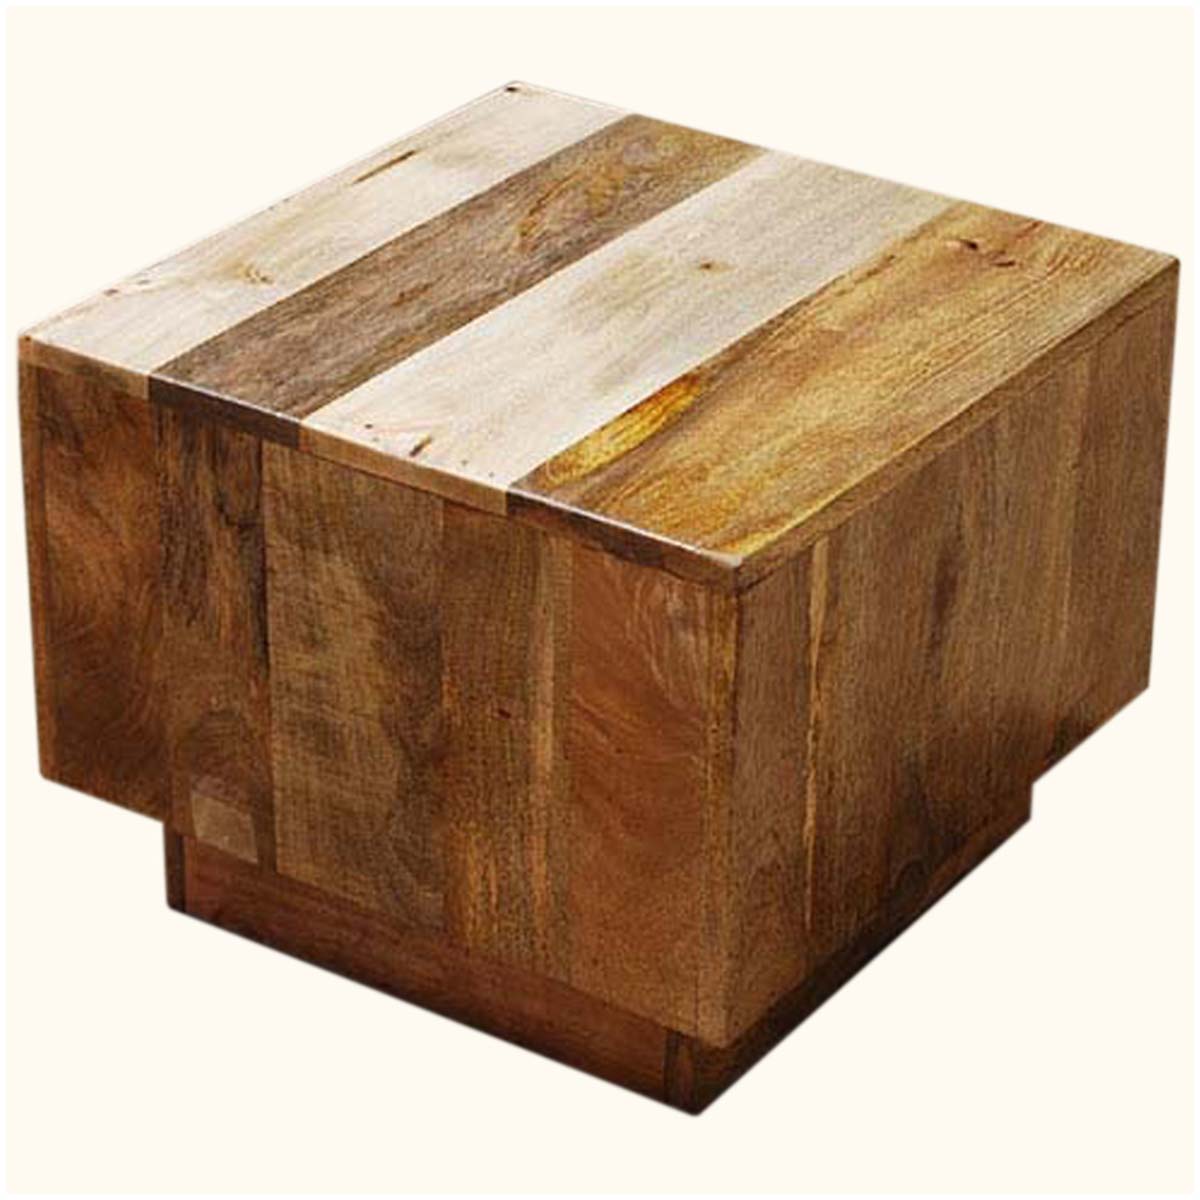 key west mango wood cube accent table superior modern coffee tables toronto dark brown round end mid century piece nesting oak nest ikea small outside the uttermost company